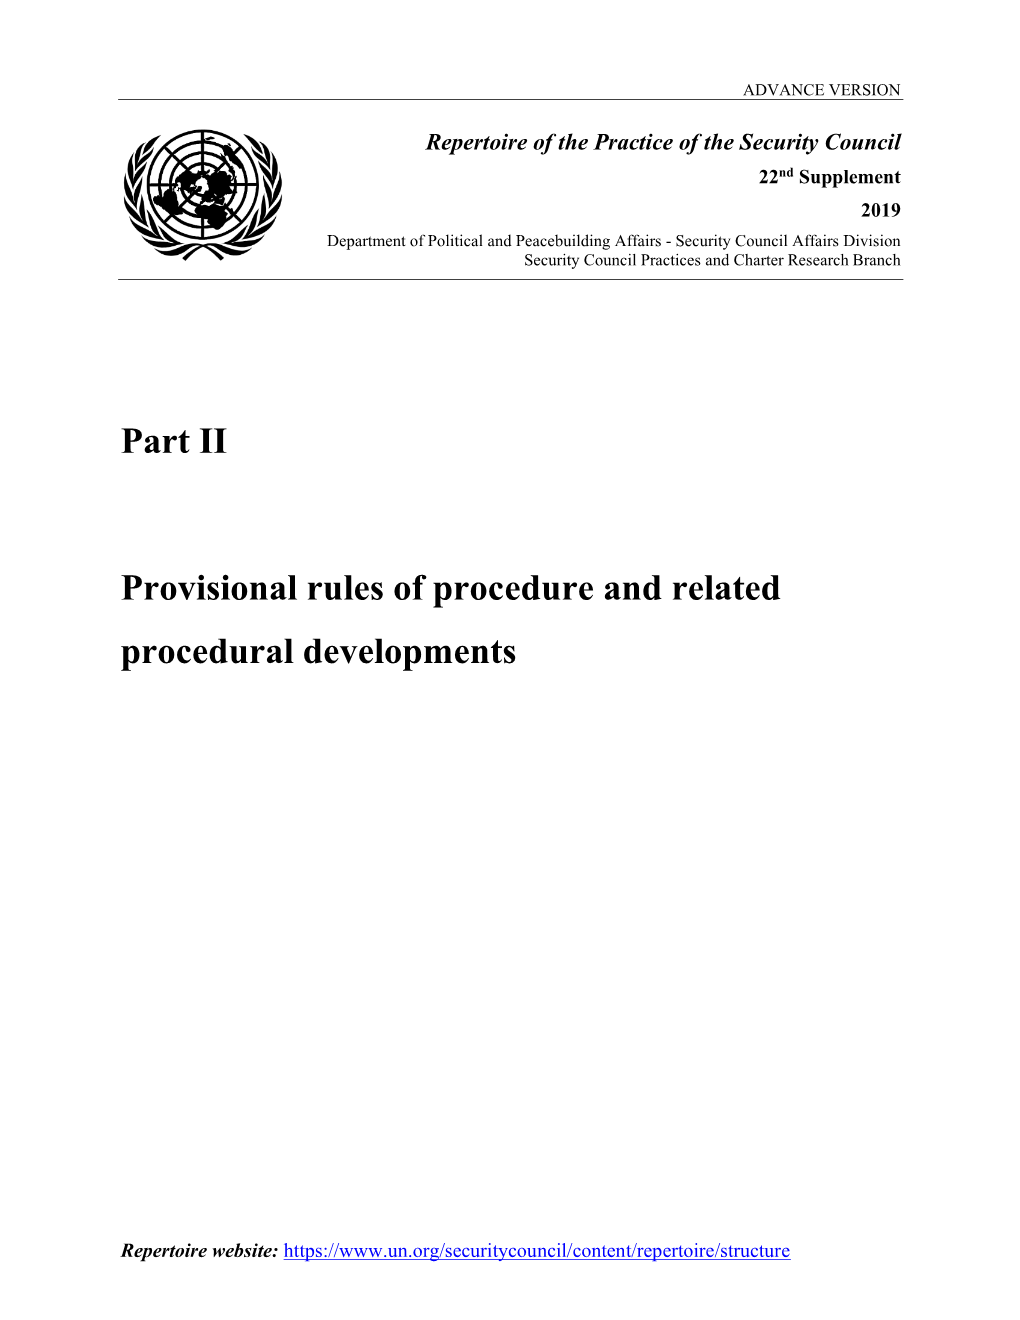 Part II Provisional Rules of Procedure and Related Procedural Developments